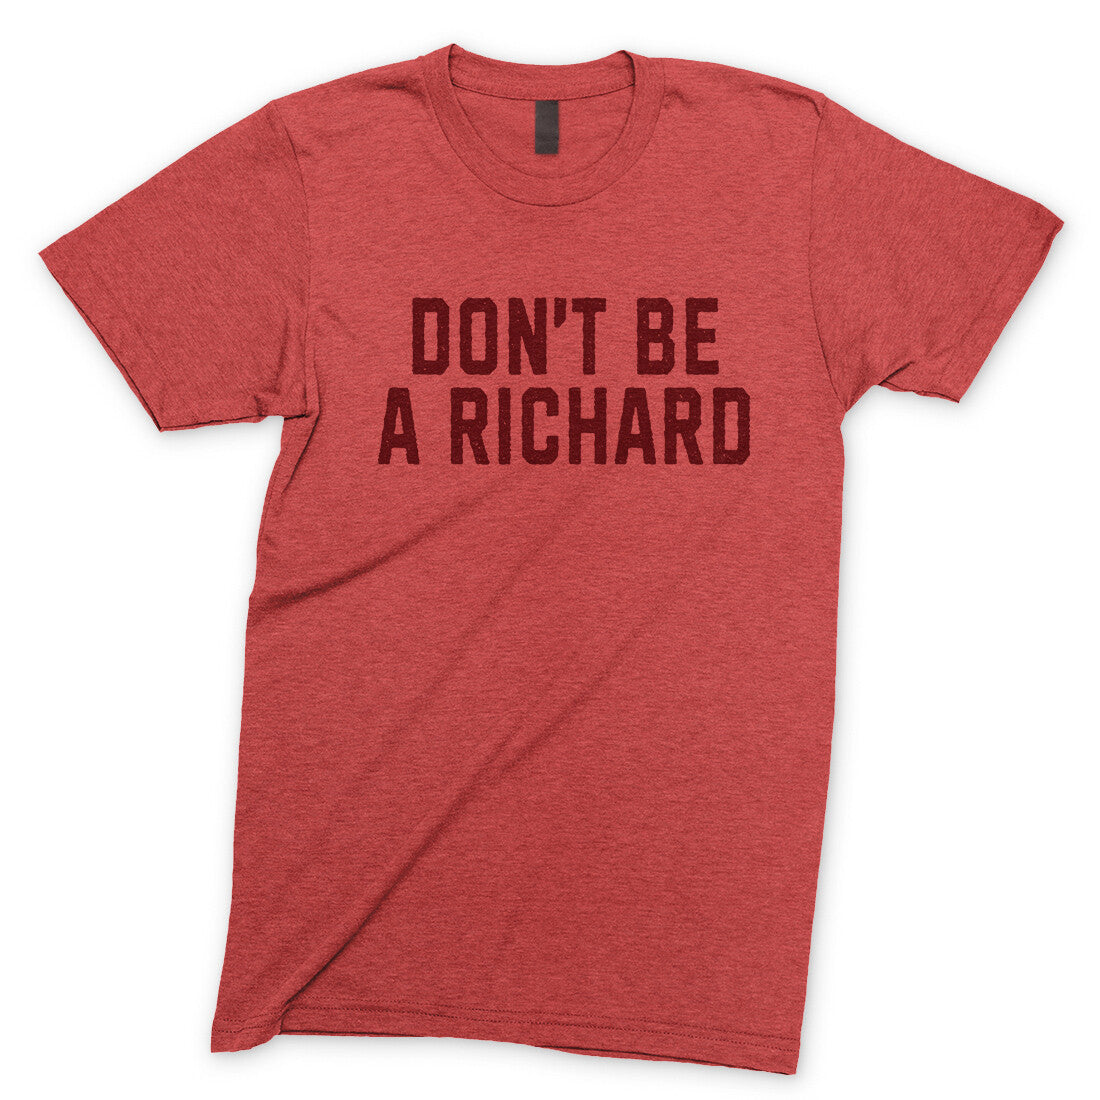 Don't Be a Richard in Heather Red Color